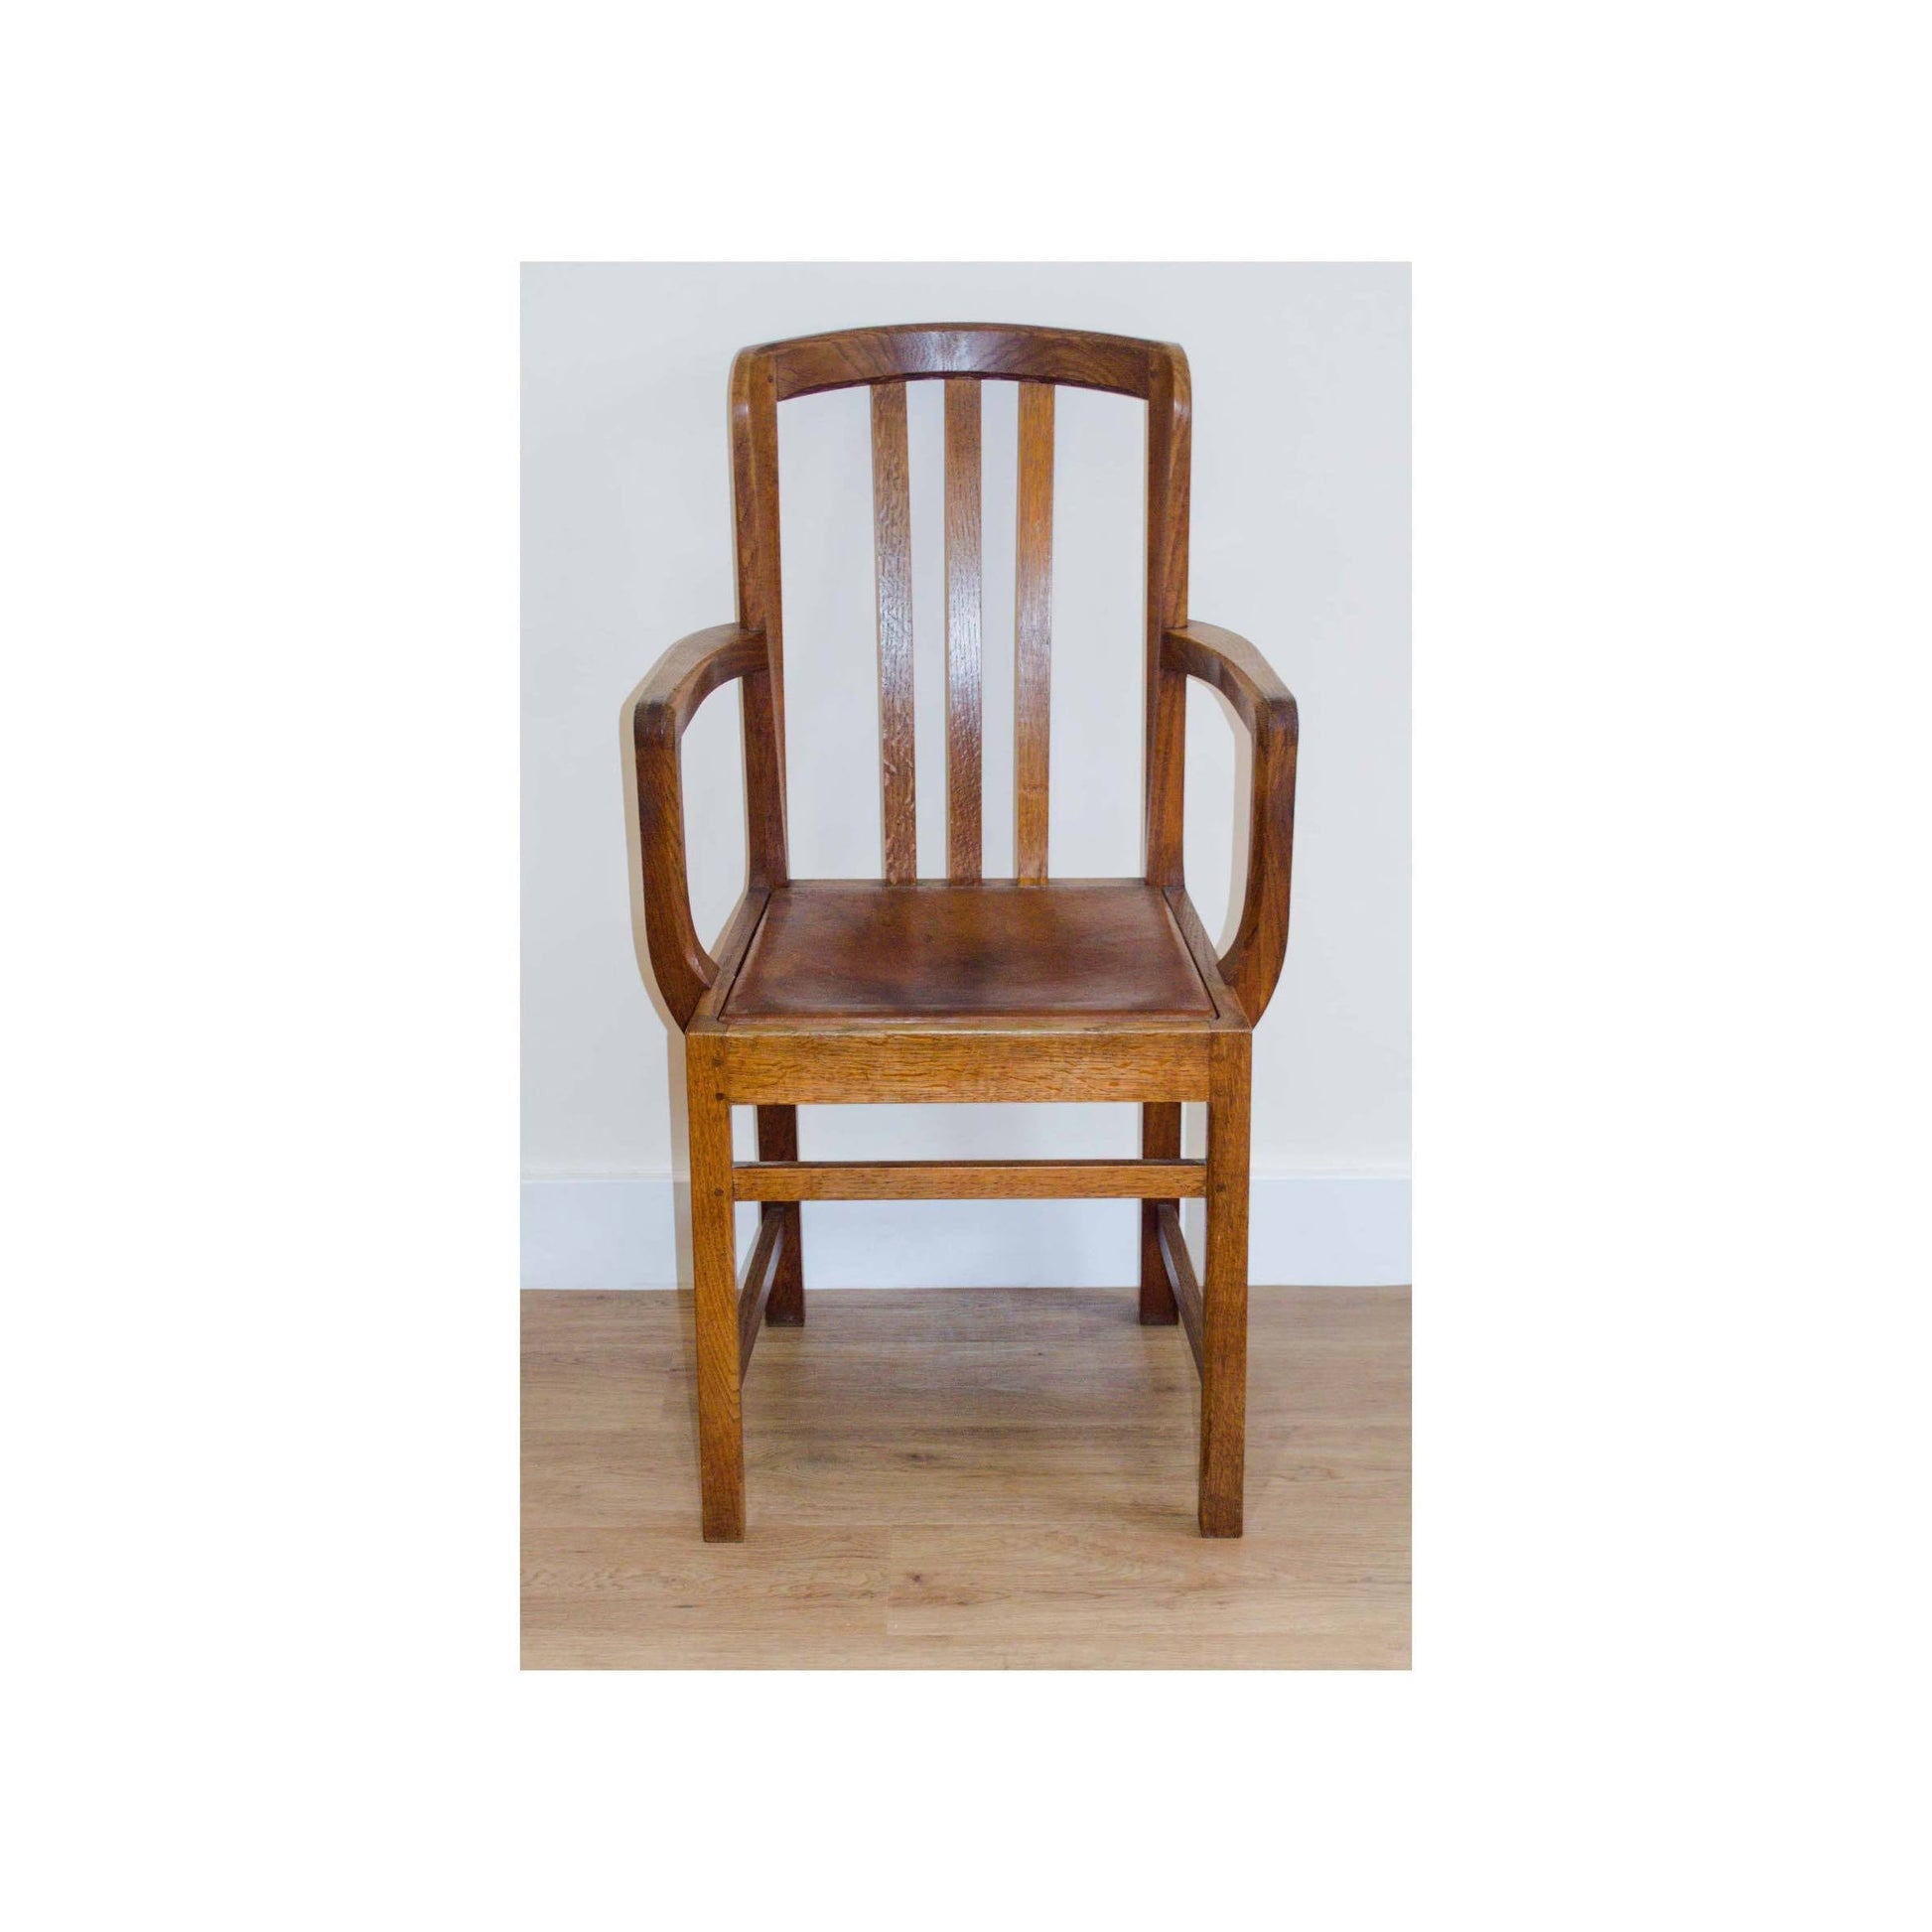 Stanley Webb Davies Stanley Webb Davies Arts and Craft Oak Armchair with Leather Seat 1936 1936